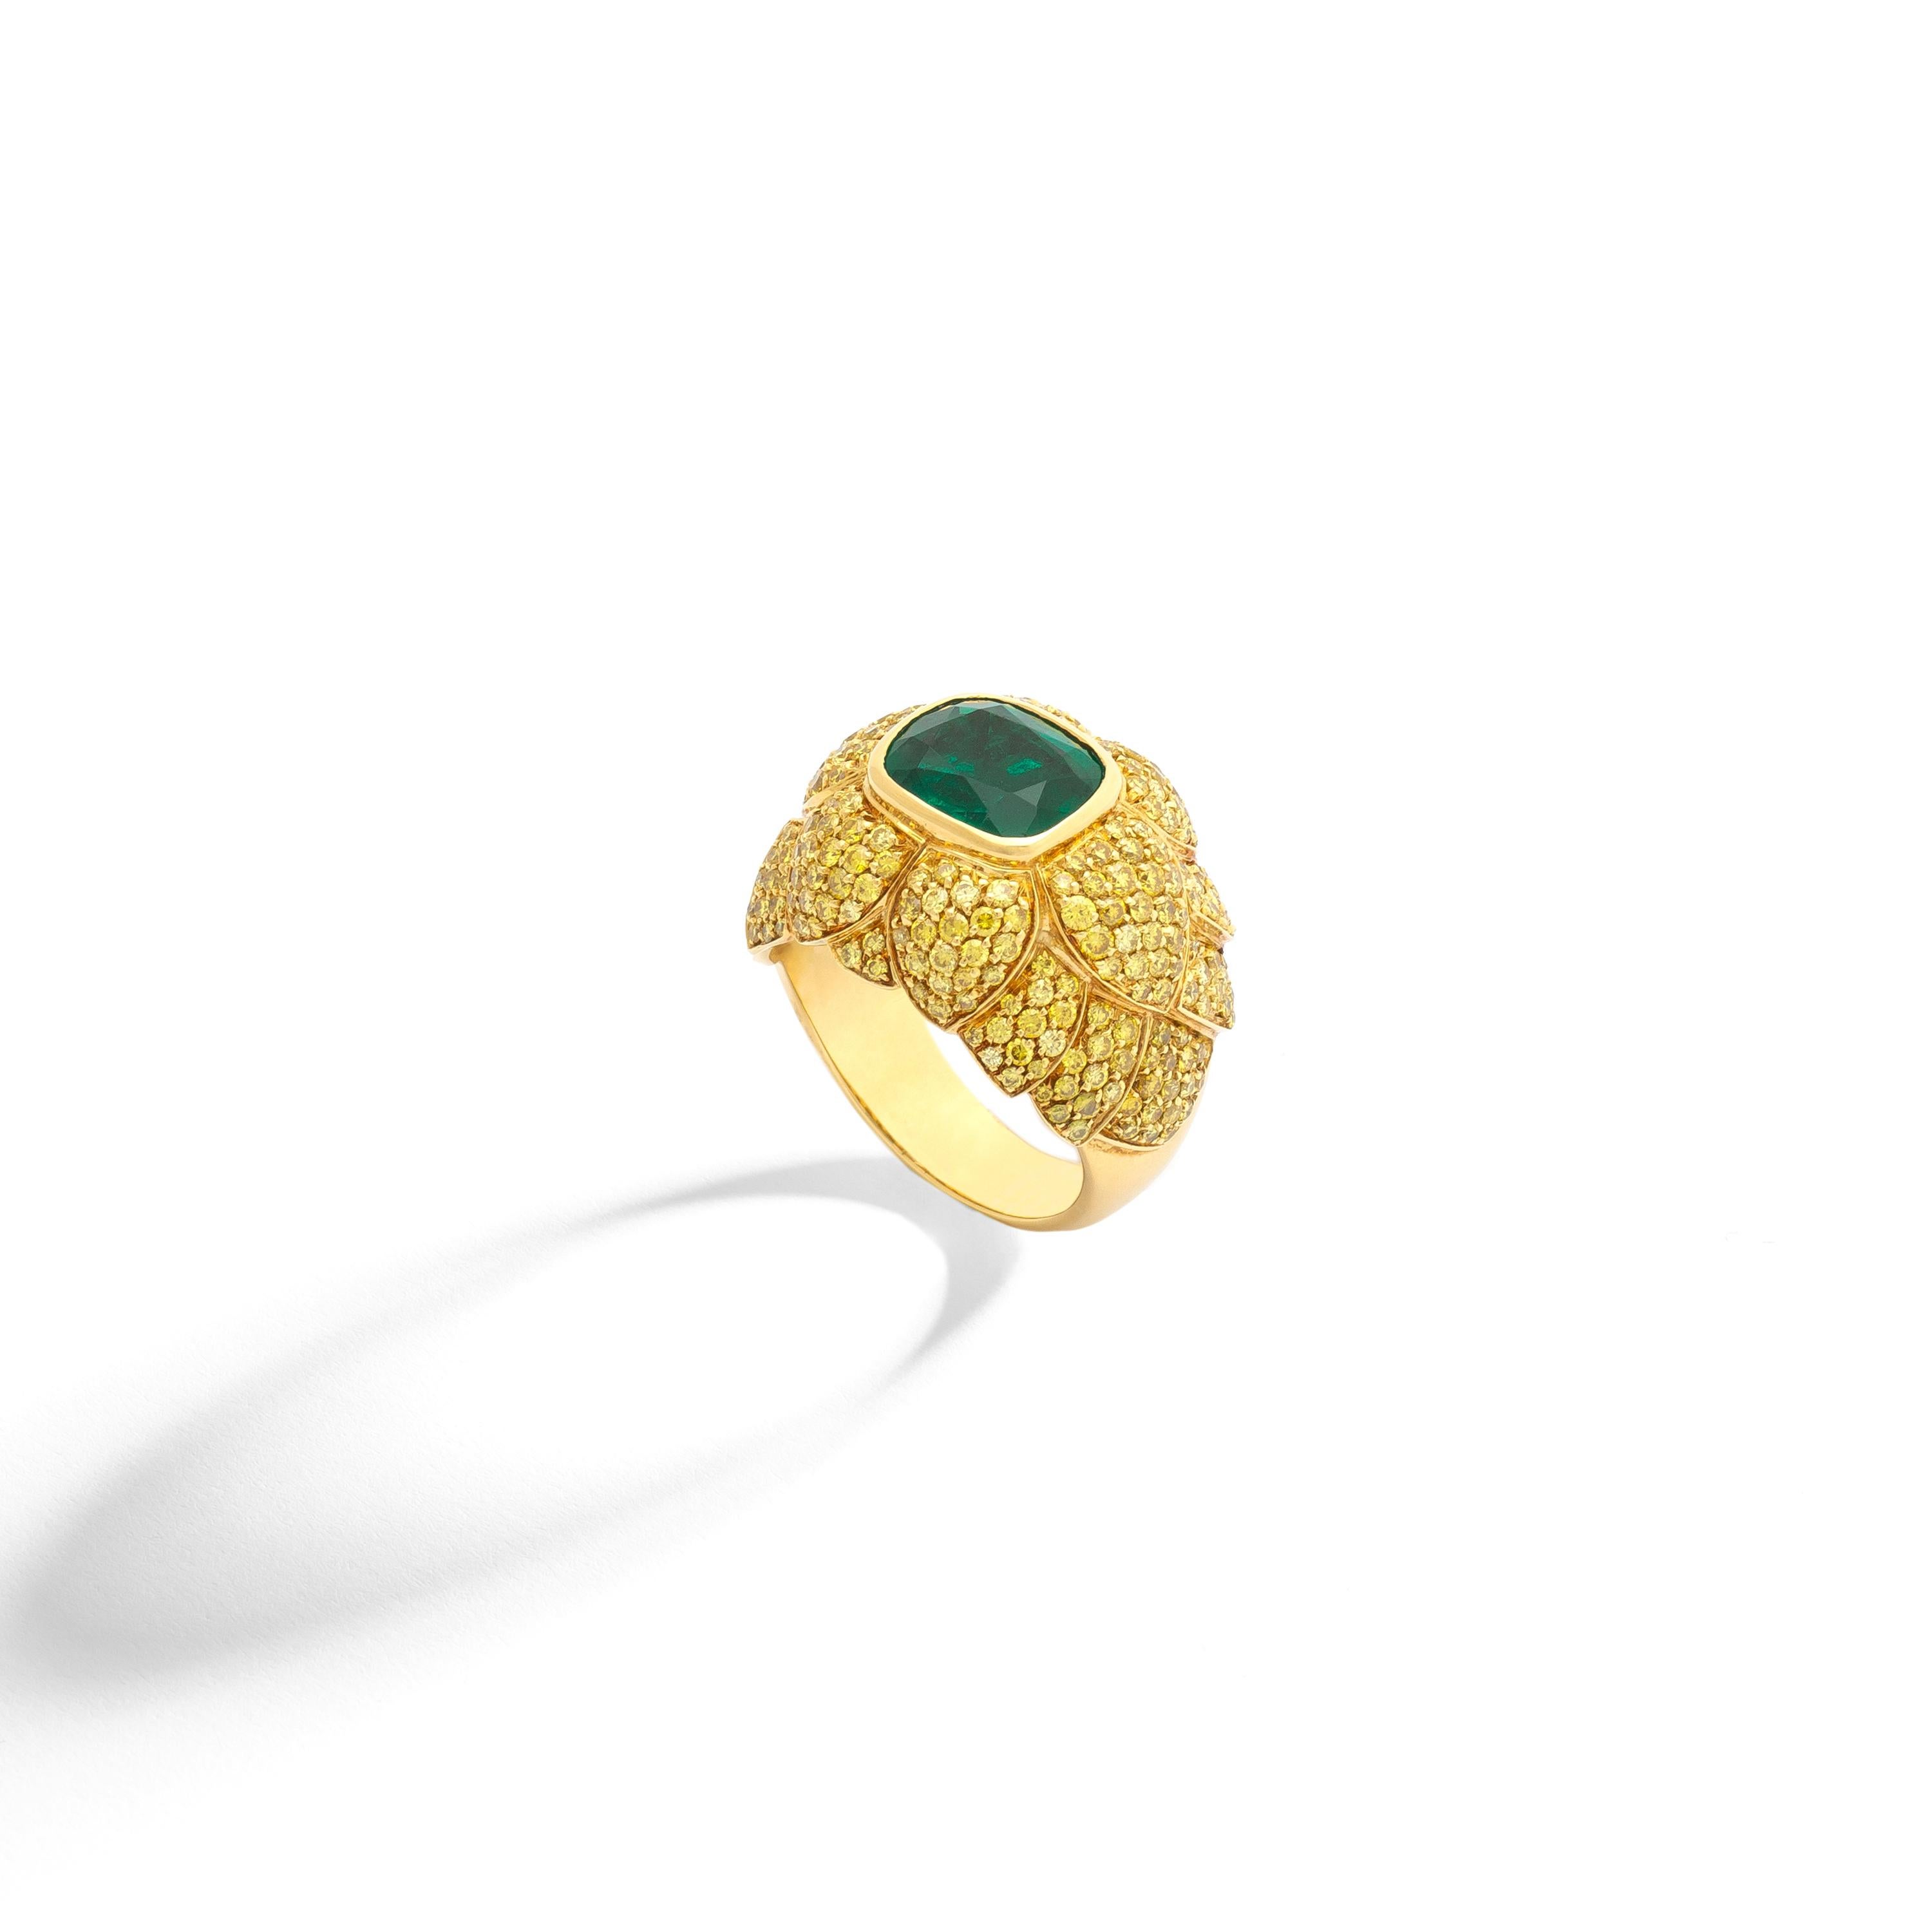 Yellow gold 18k Ring set by yellow Diamonds 1.91 carats and centered by a 2.47 carats Emerald.

